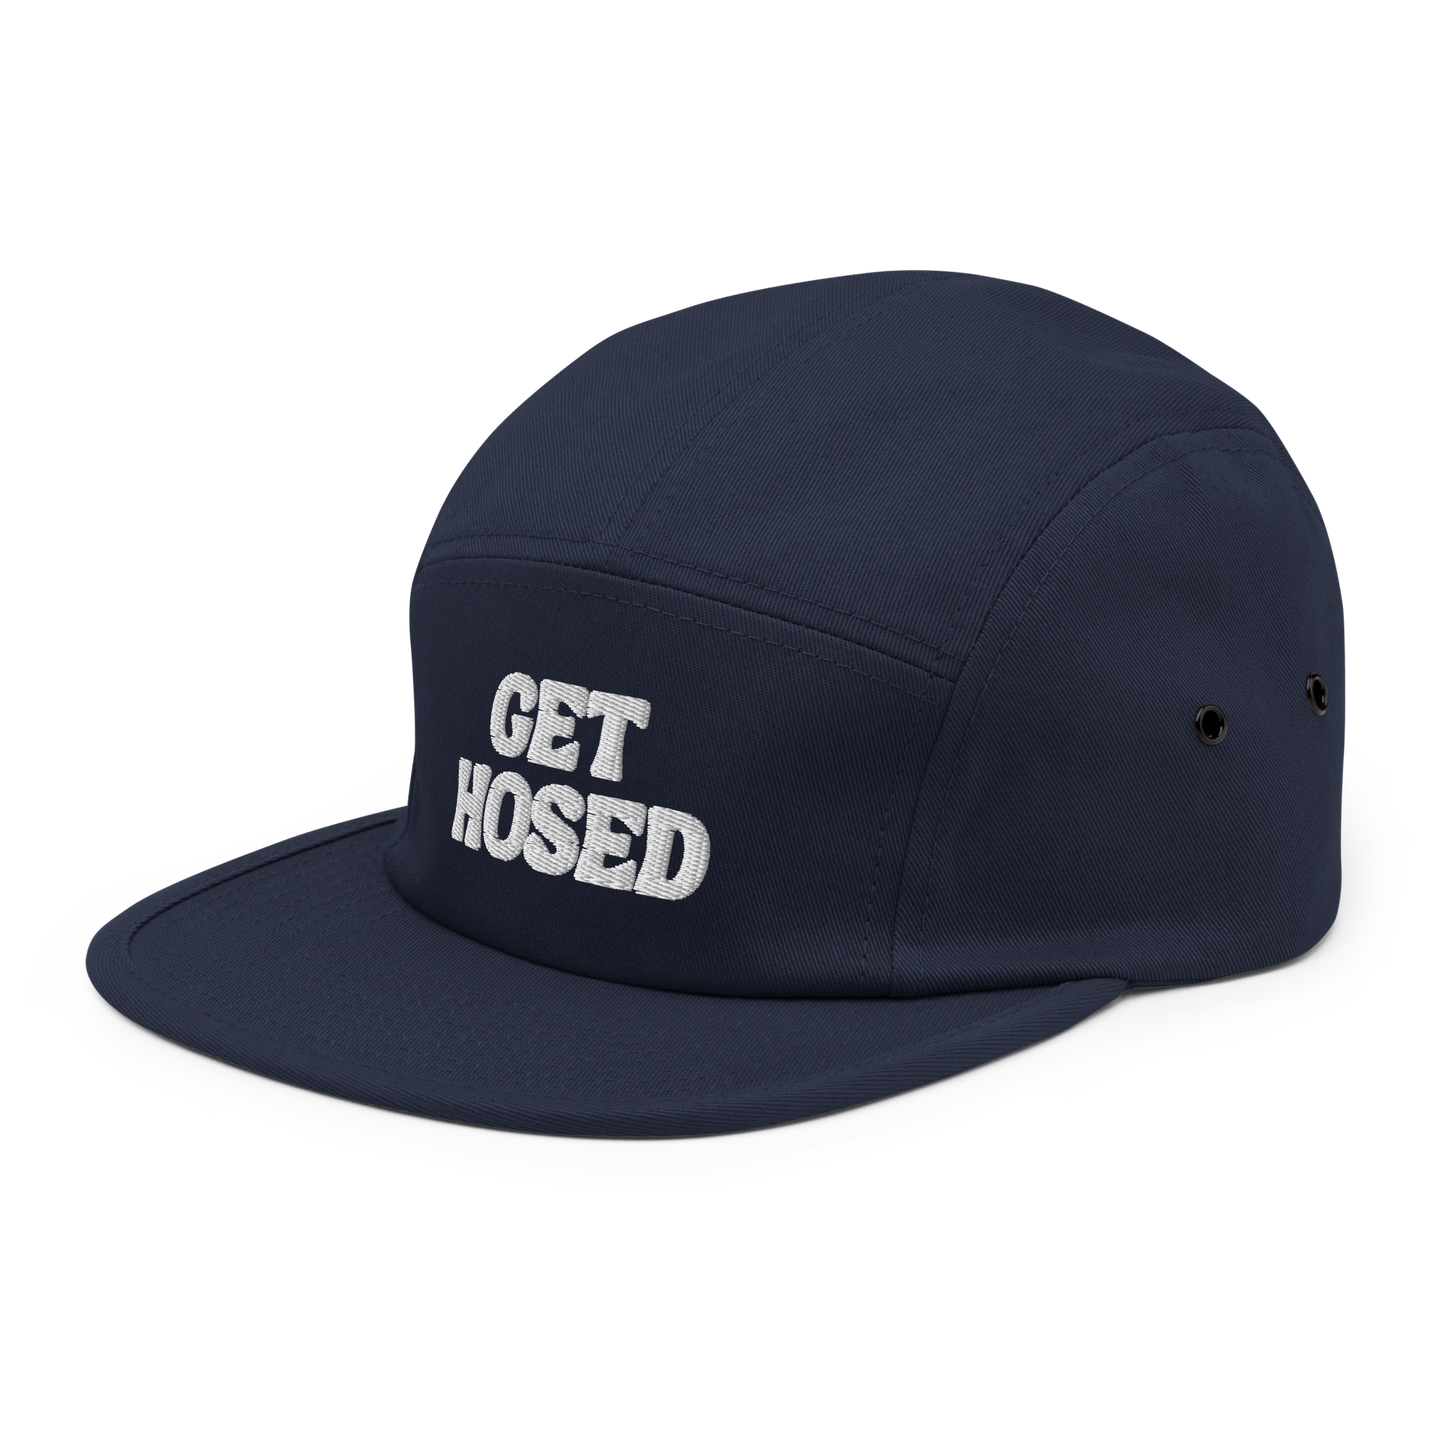 GET HOSED Five Panel Tower Hat